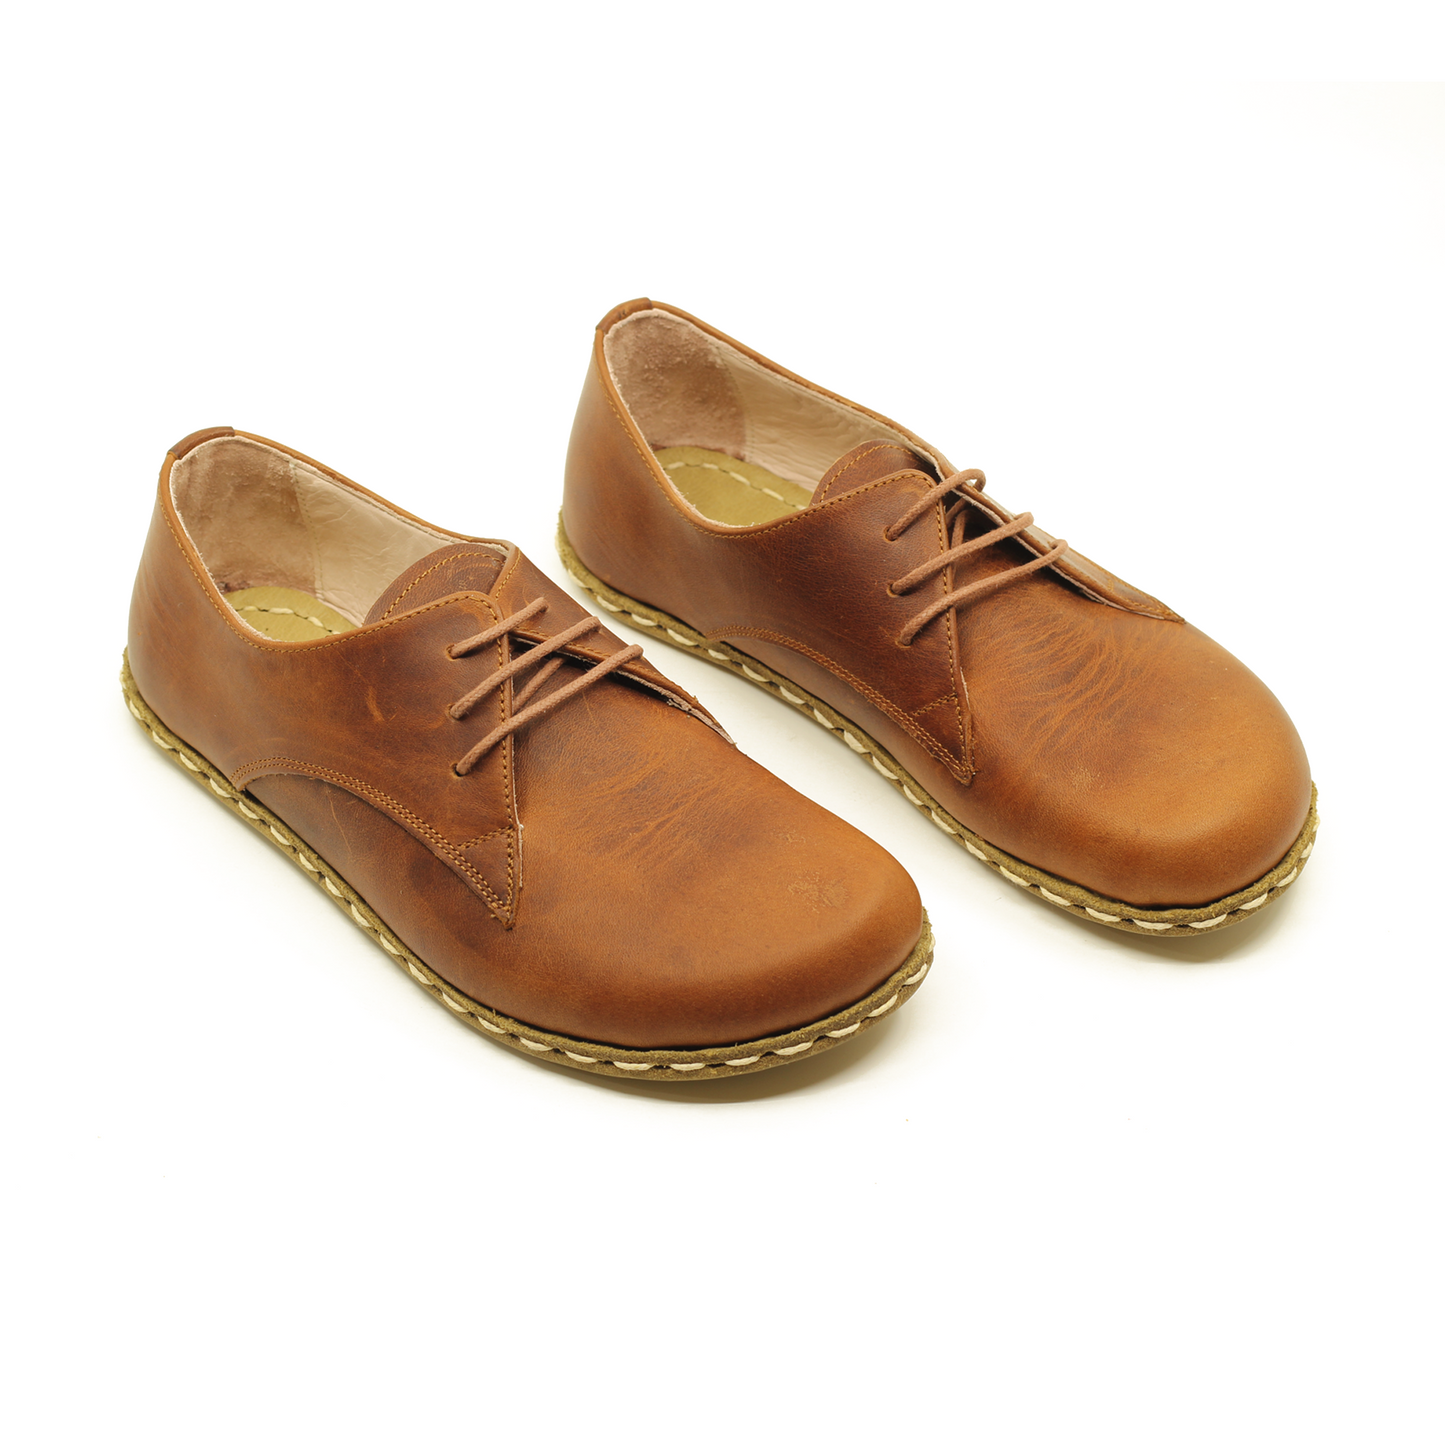 Shop Women's Laced Crazy Brown Barefoot Shoes - Feel the Freedom of Barefoot Movement